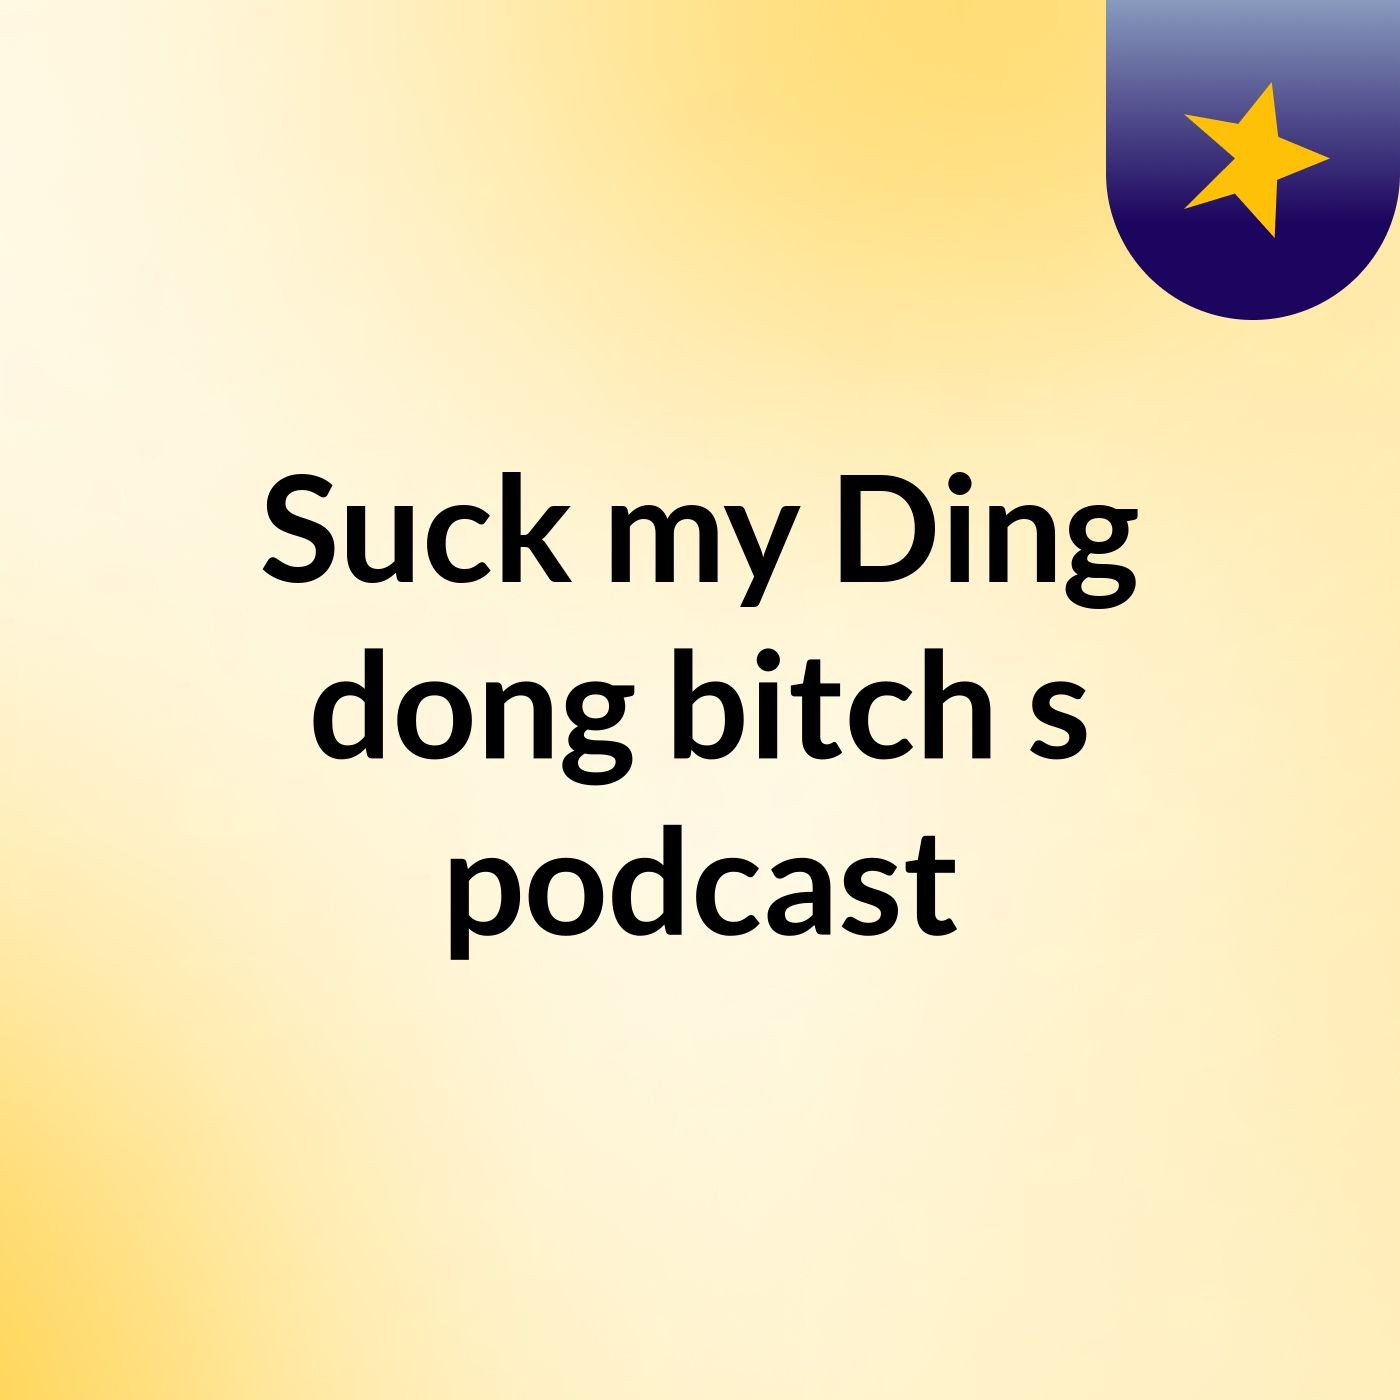 Suck my Ding dong bitch's podcast